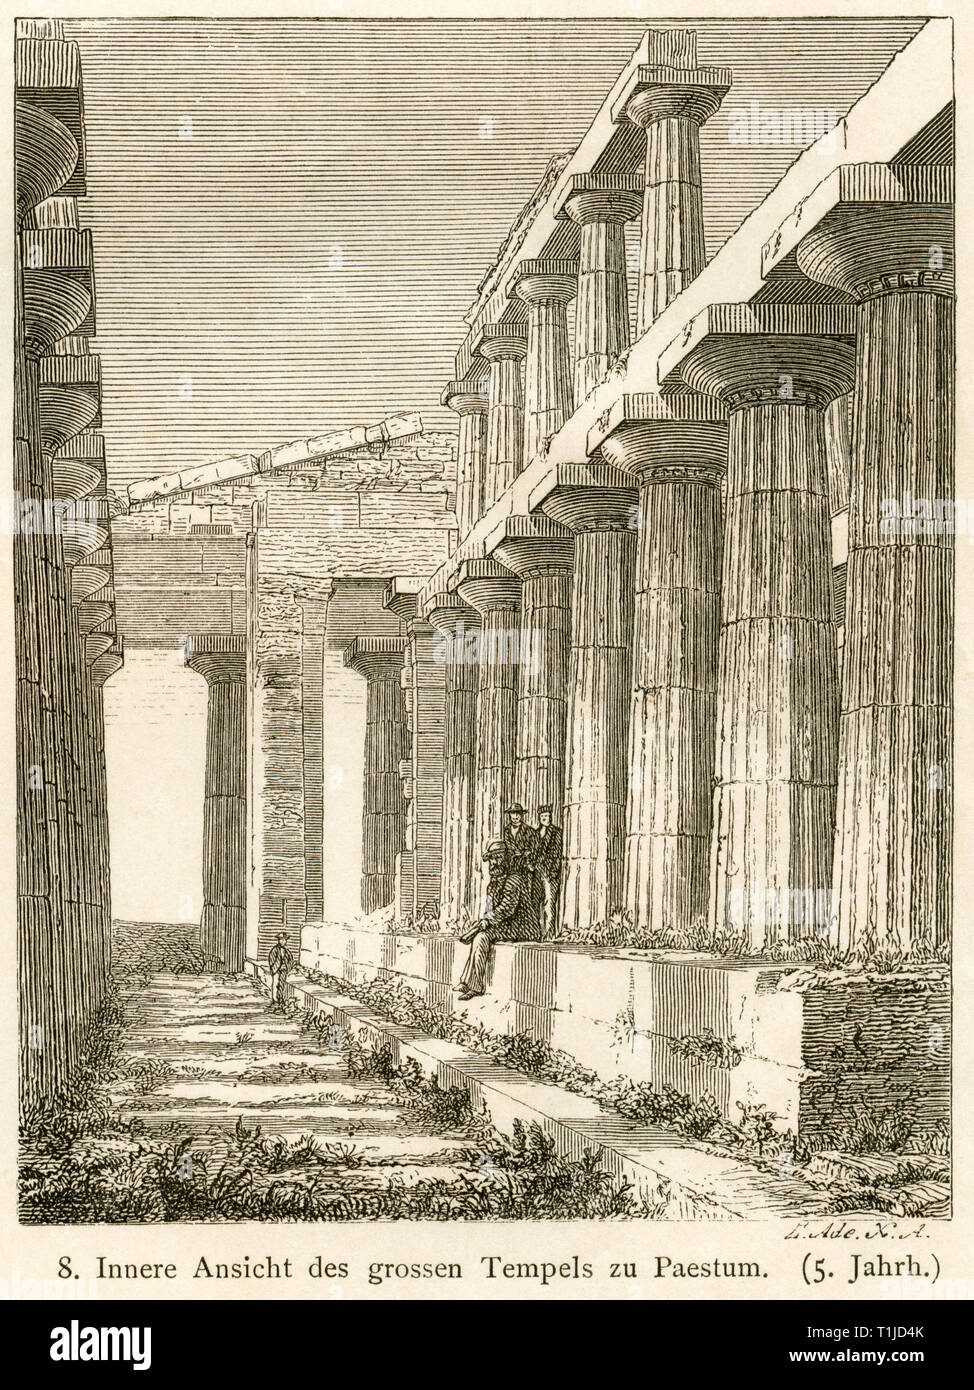 ancient world, Italy, Paestum, original text: Innere Ansicht des grossen Tempels zu Paestum (the big temple of Paestum inside), illustration from: 'Kunsthistorische Bilderbogen ' (Art history image gallery), first part, published by E. A. Seemann, Leipzig, 1878., Additional-Rights-Clearance-Info-Not-Available Stock Photo